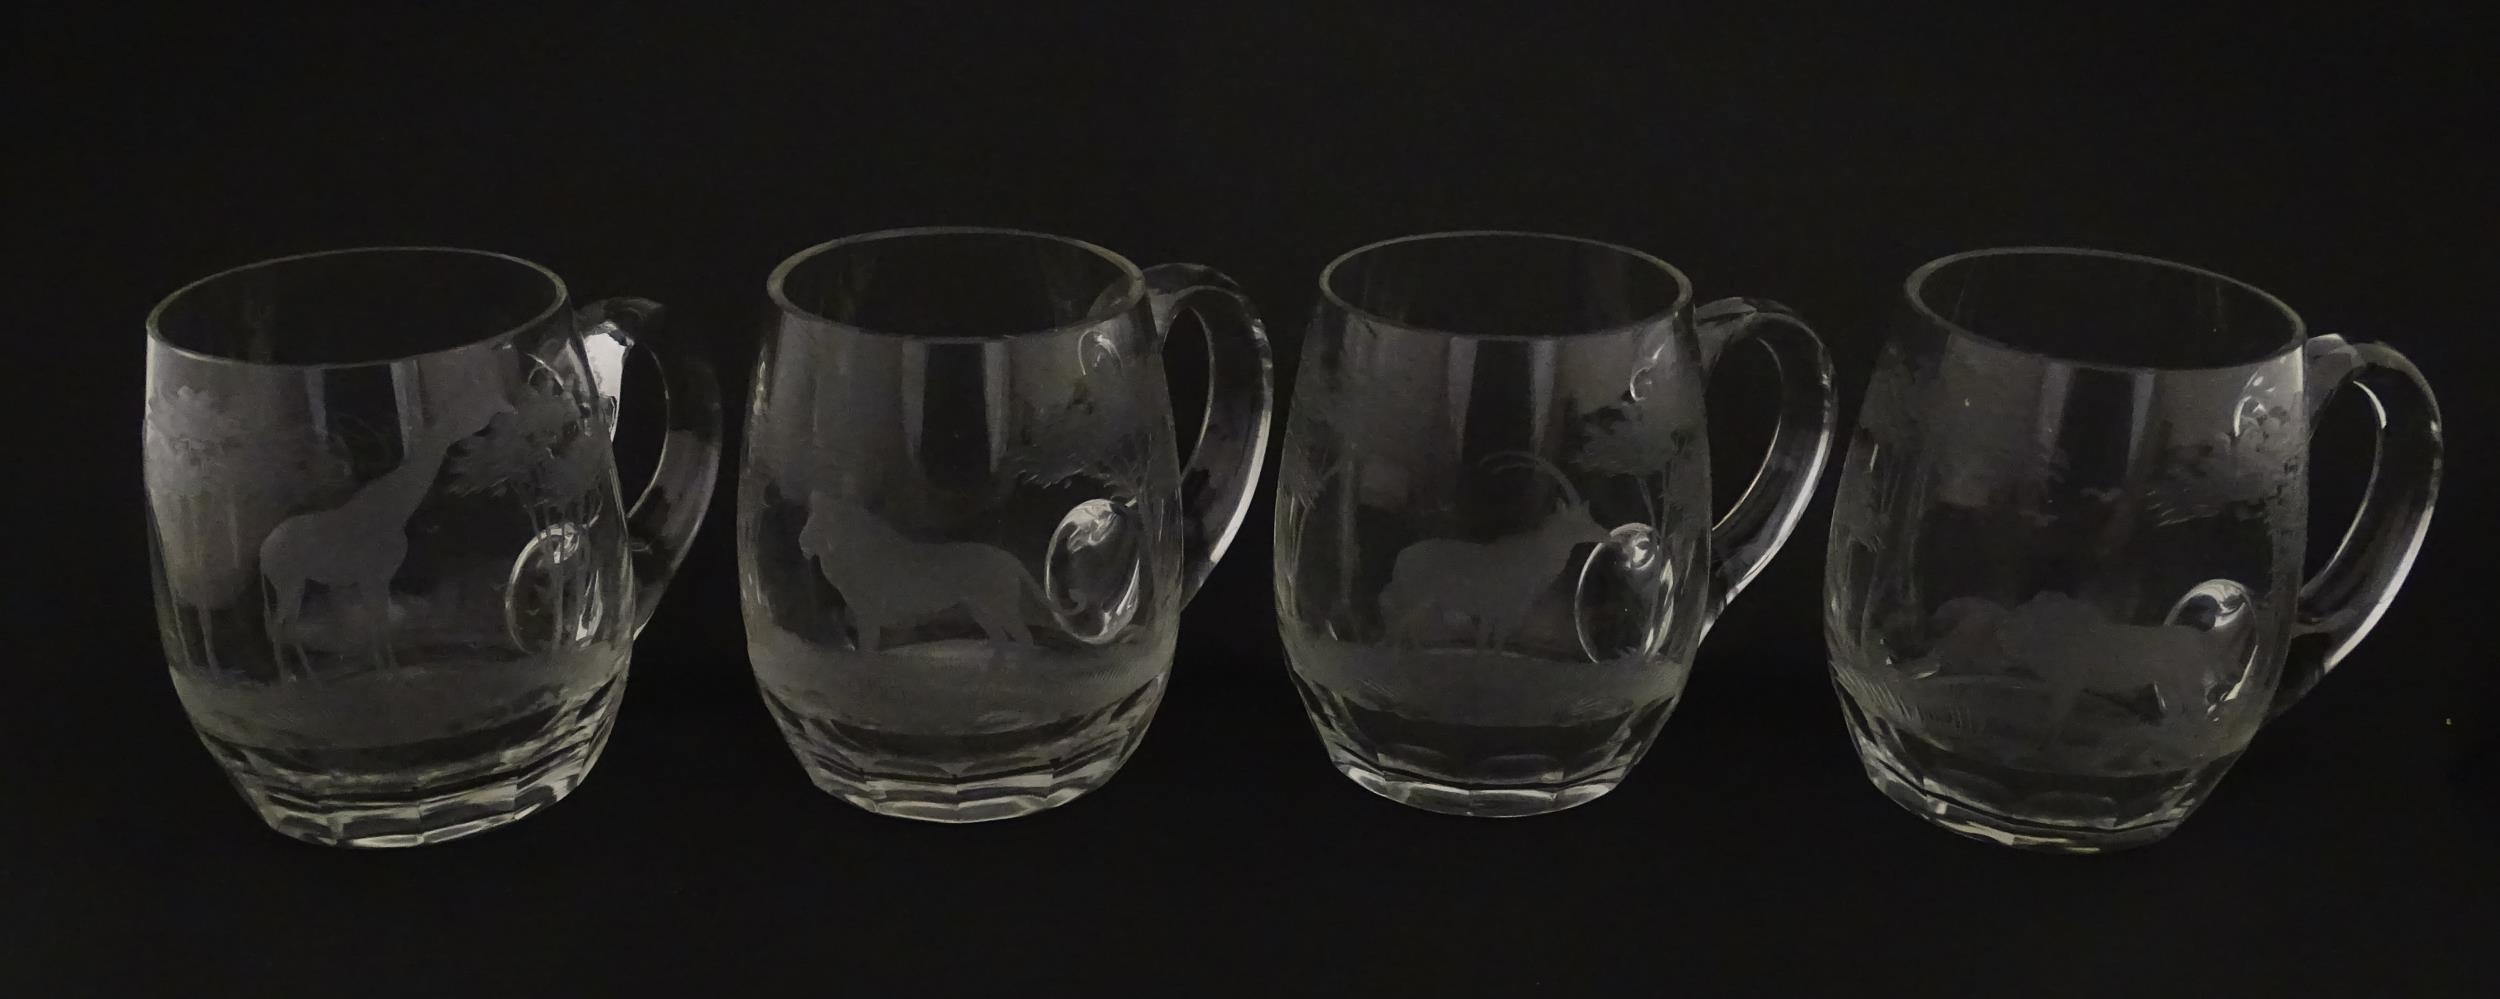 Seven Rowland Ward pint mugs / glasses with engraved Safari animal detail. Unsigned. Approx. 4 1/ - Image 6 of 26